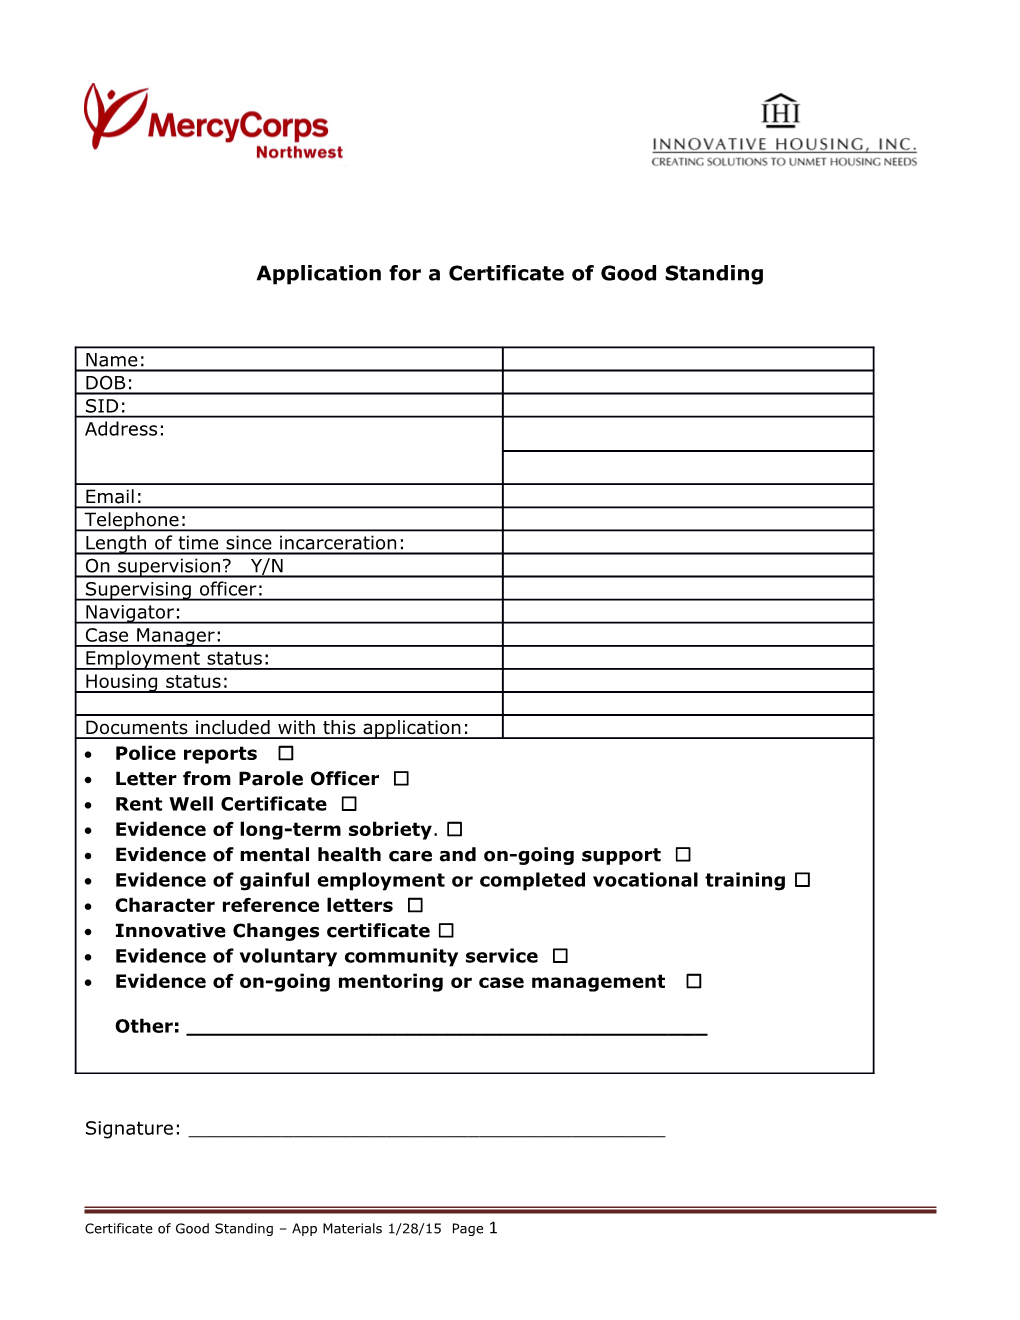 Application for a Certificate of Good Standing